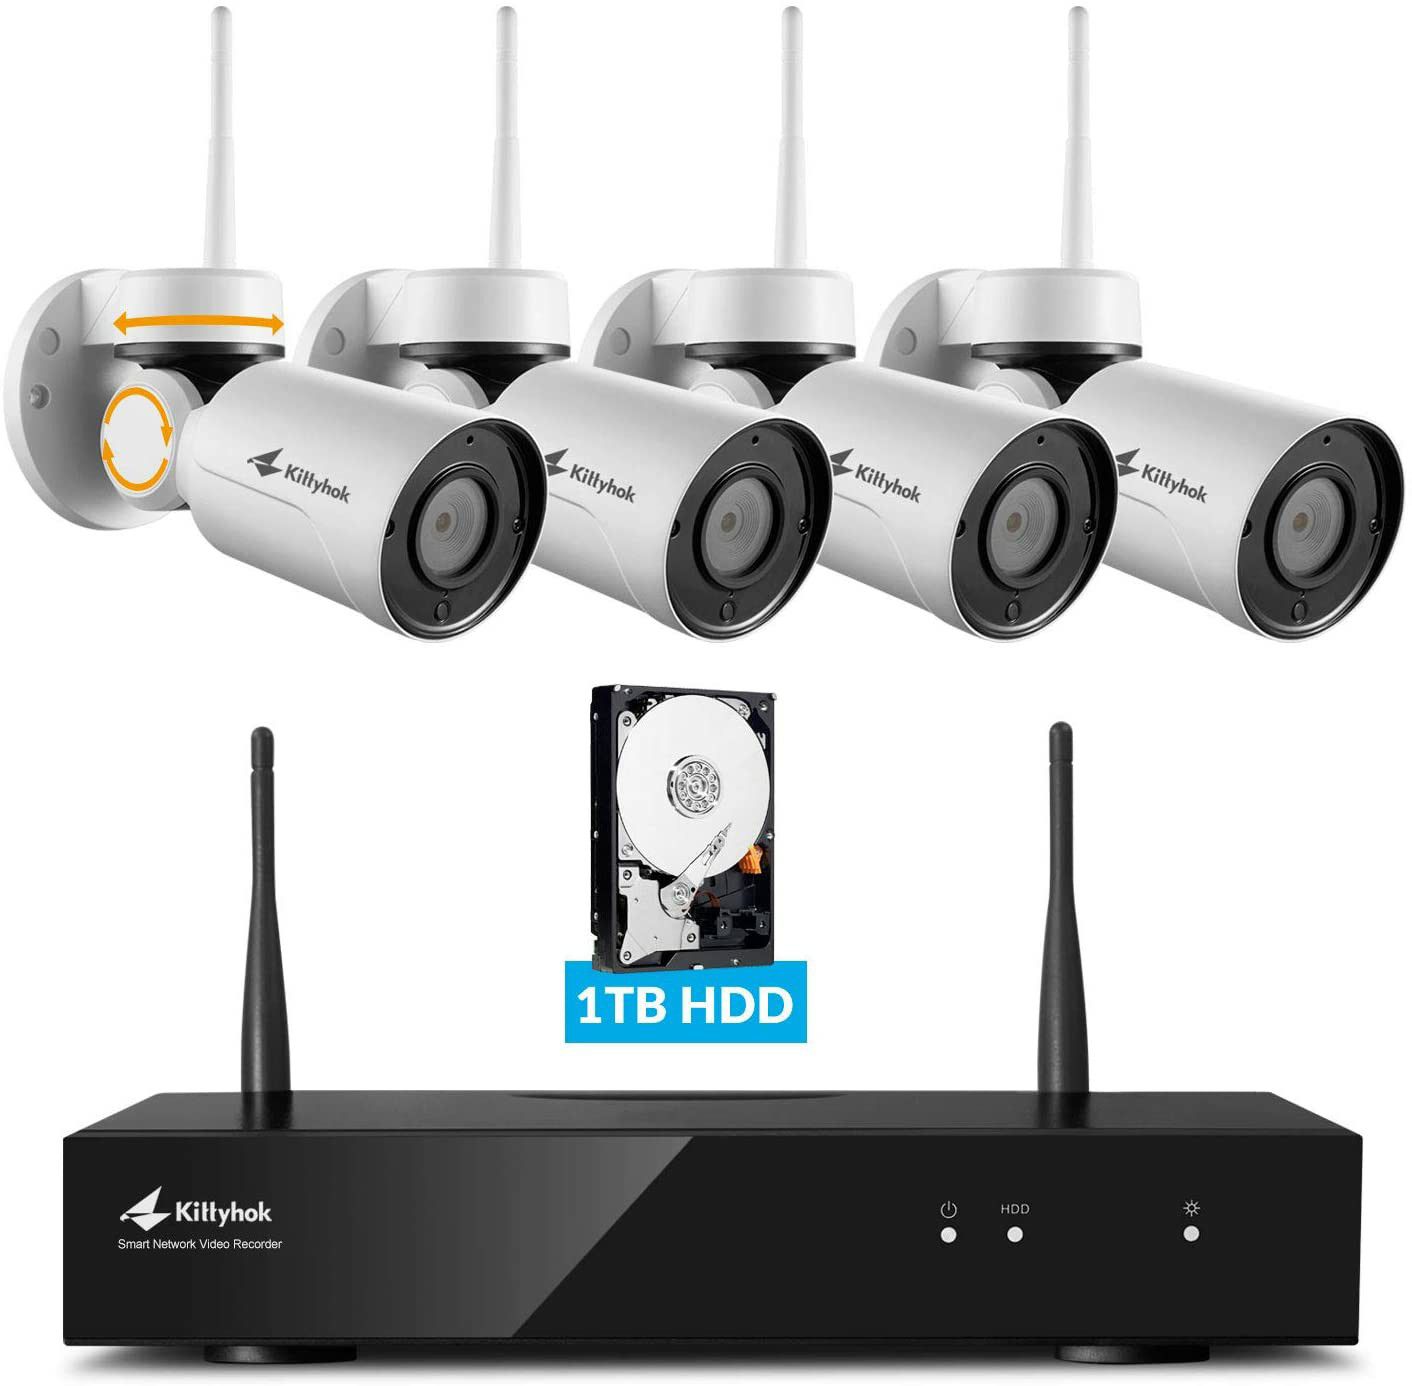 Pan Tilt Wireless Security Camera System with 1TB Hard Drive and Audio, Kittyhok 8CH 4pcs 1080p PTZ Wifi Camera Outdoor/Indoor,100ft Night Vision